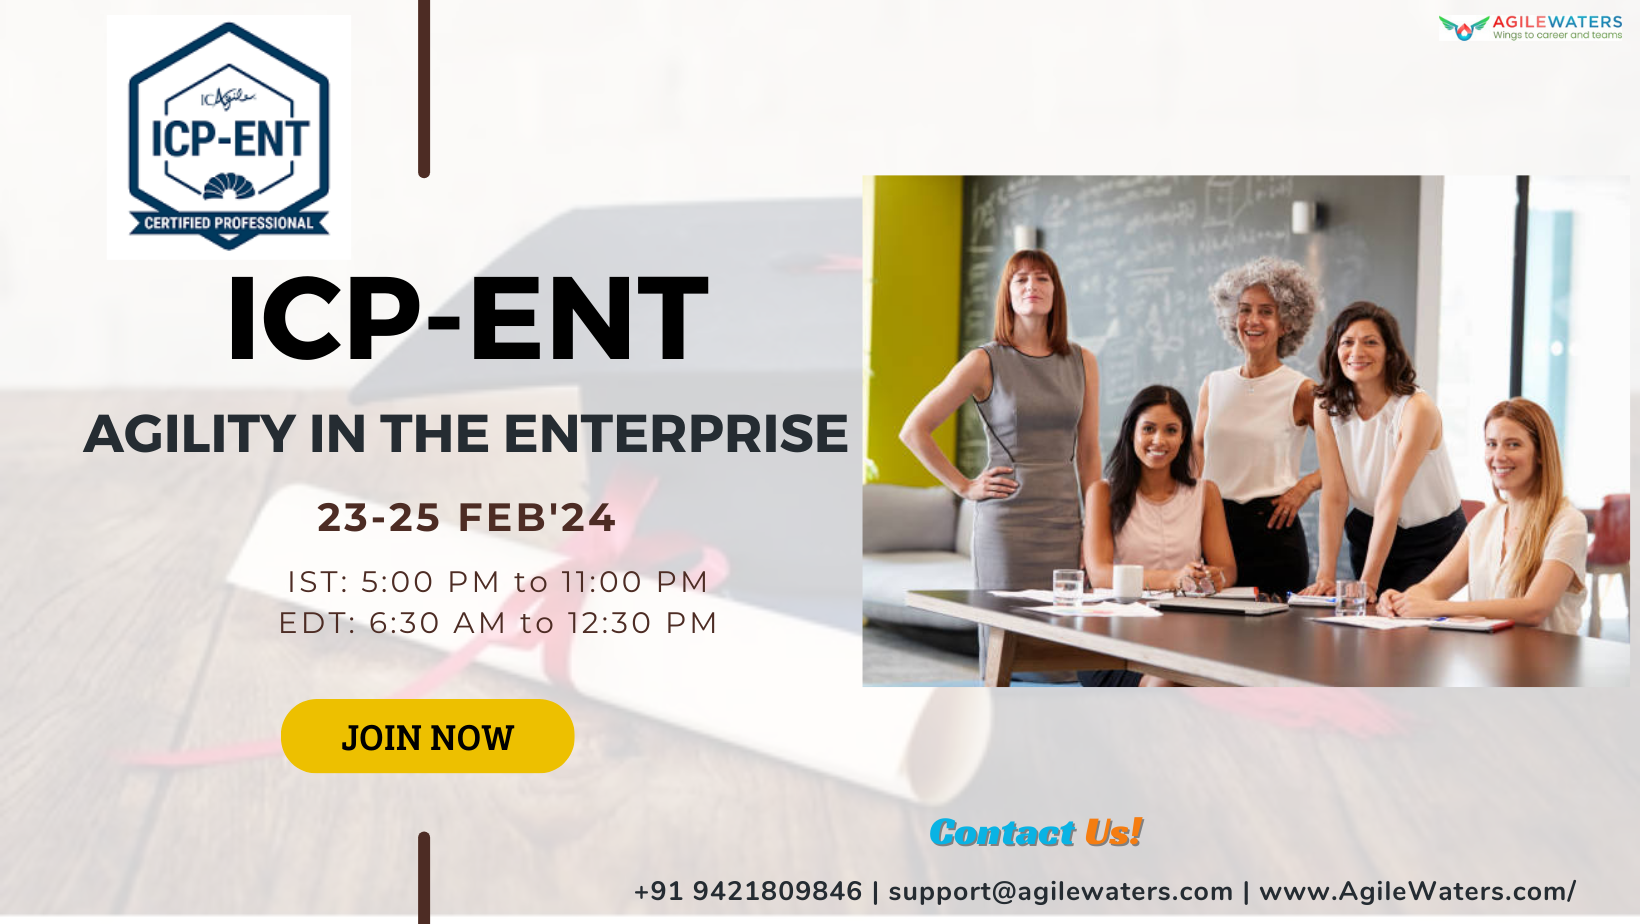 ICP-ENT Agility in the Enterprise Coaching Certification, Online Event